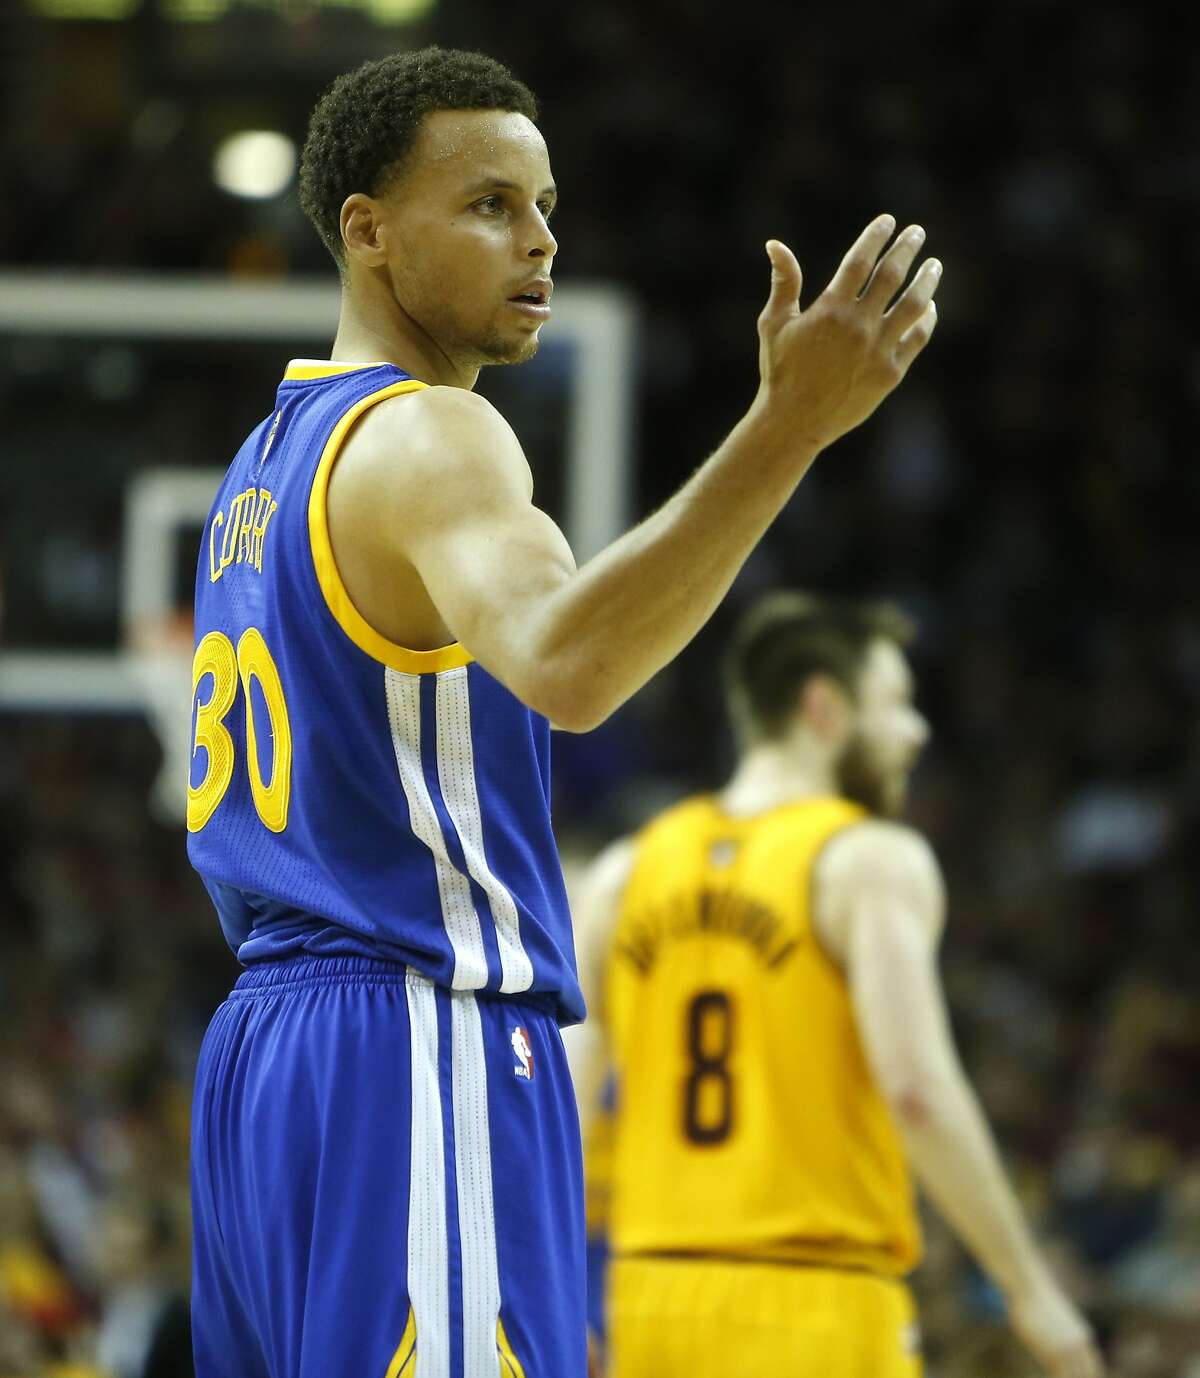 Yes, referees blew these three huge calls, but Warriors blew game vs.  Cavaliers